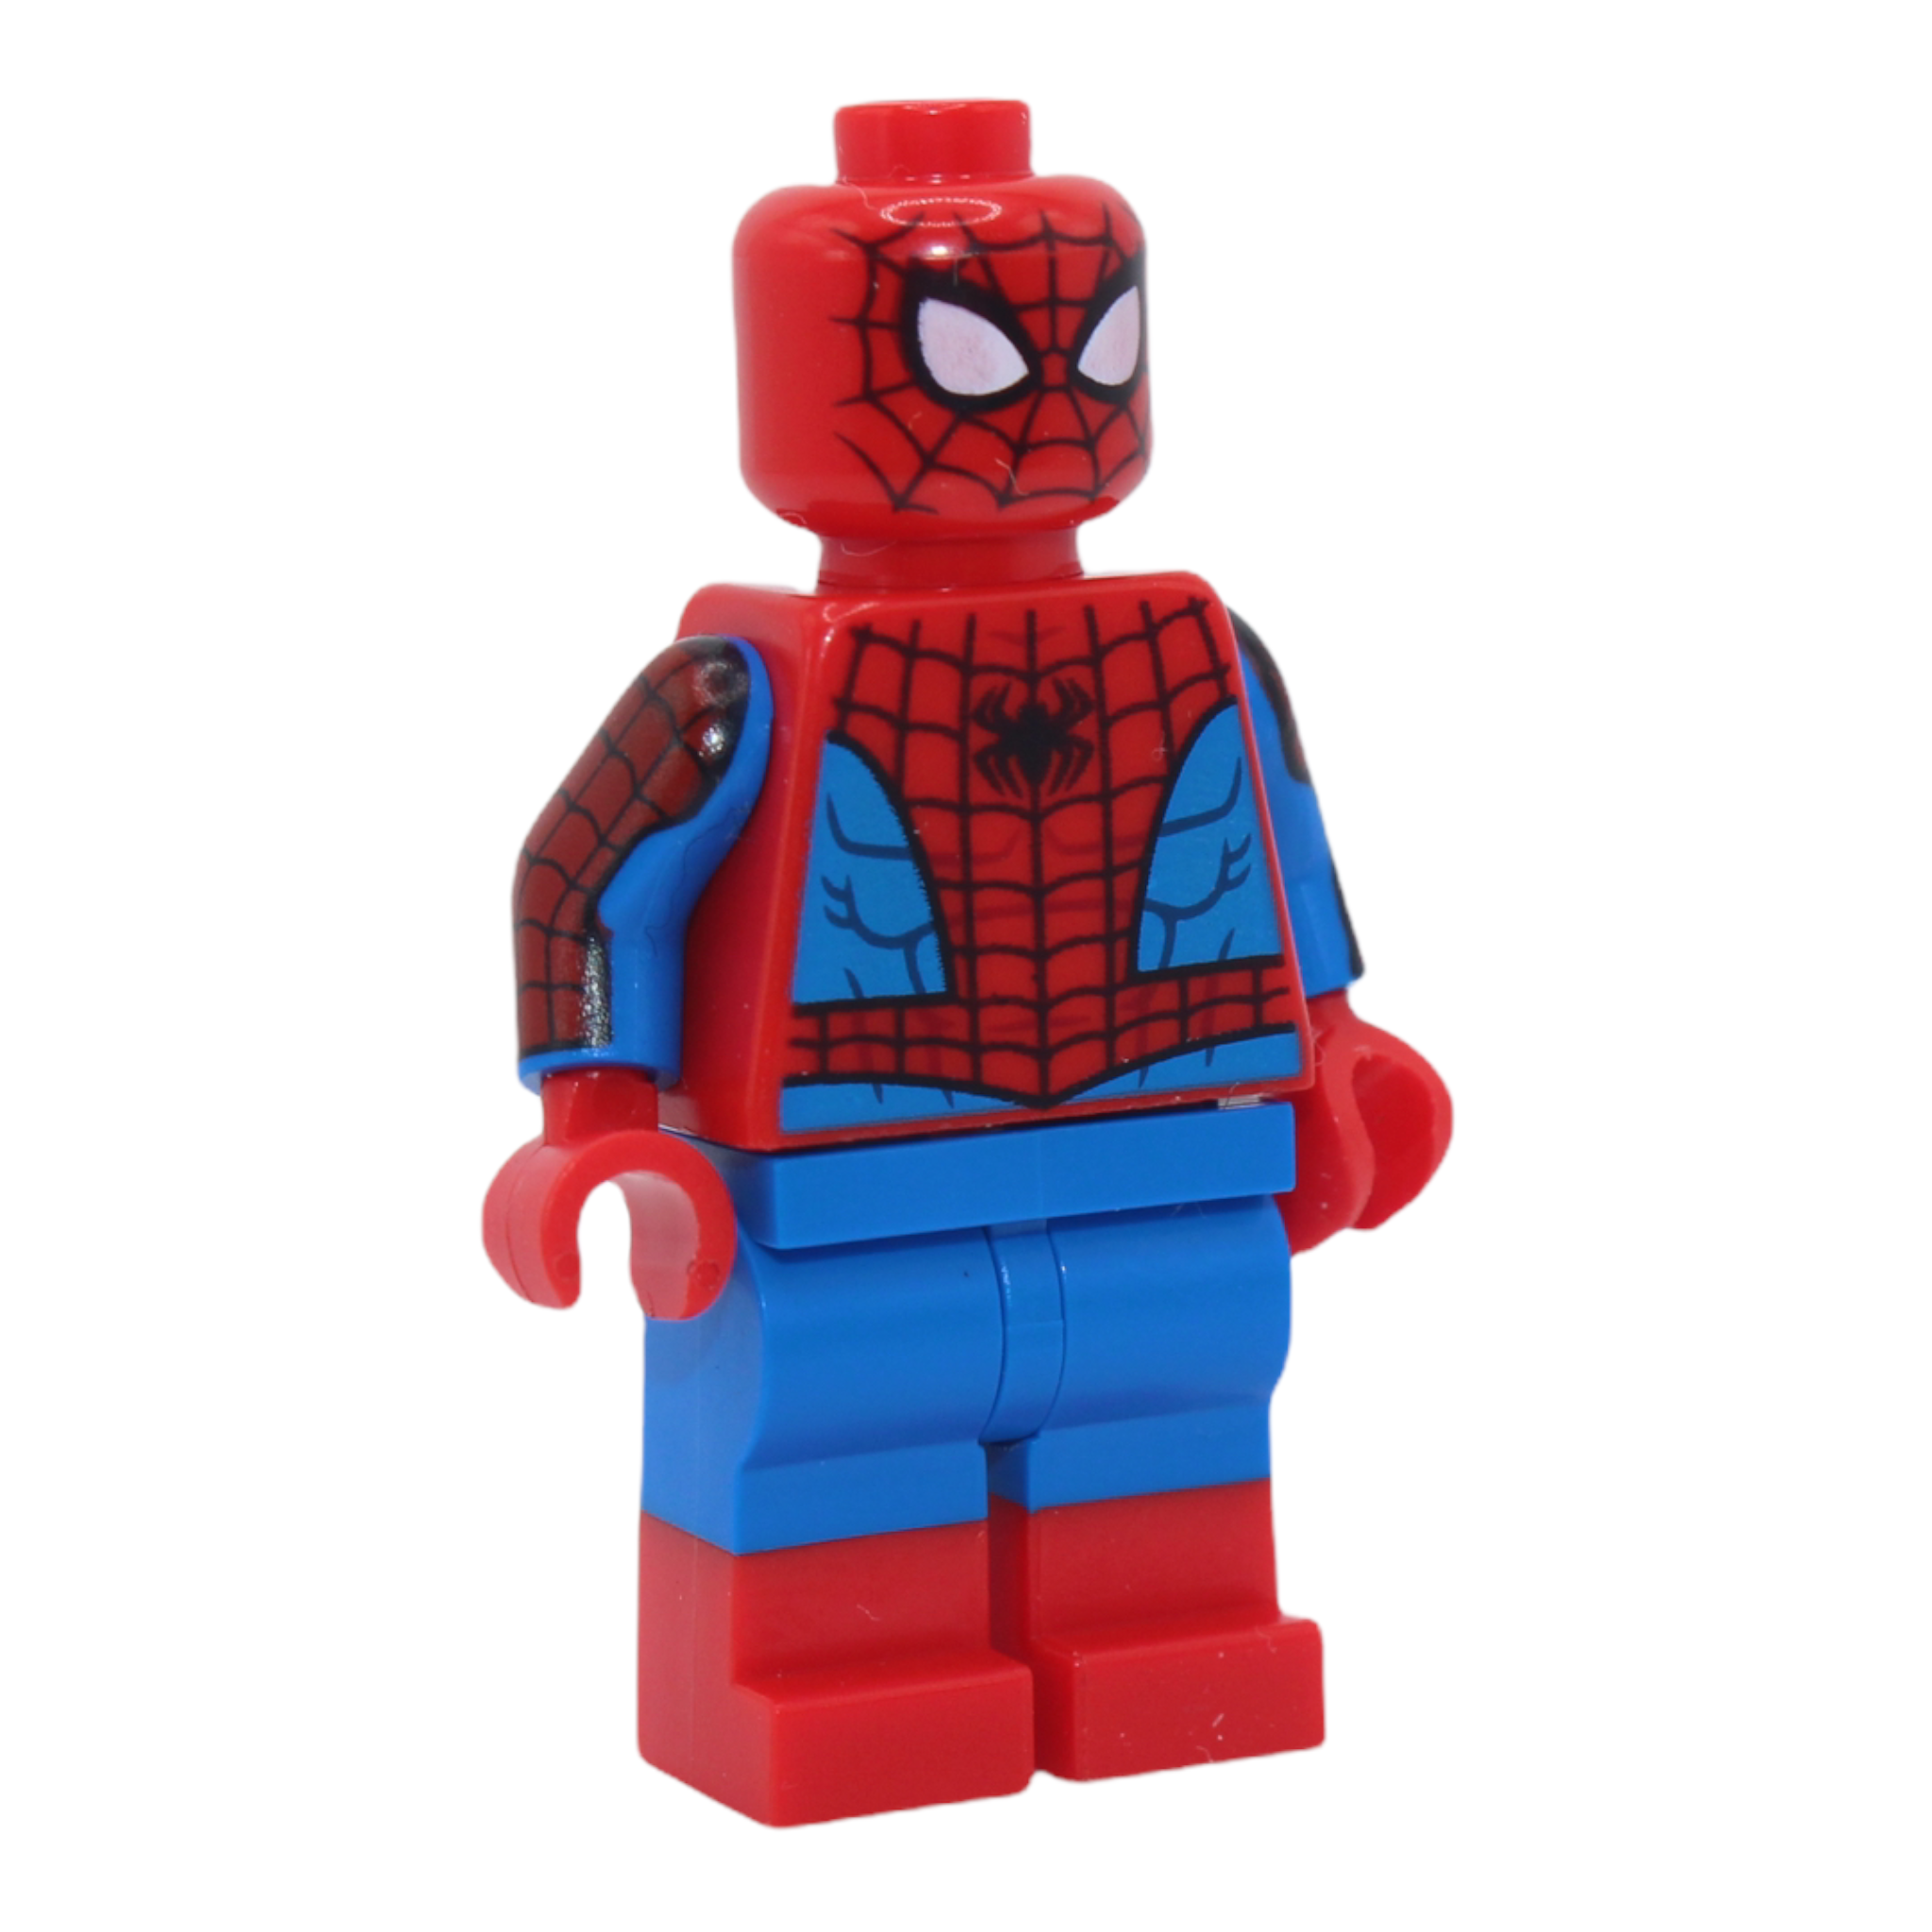 Spider-Man (printed arms, boots)